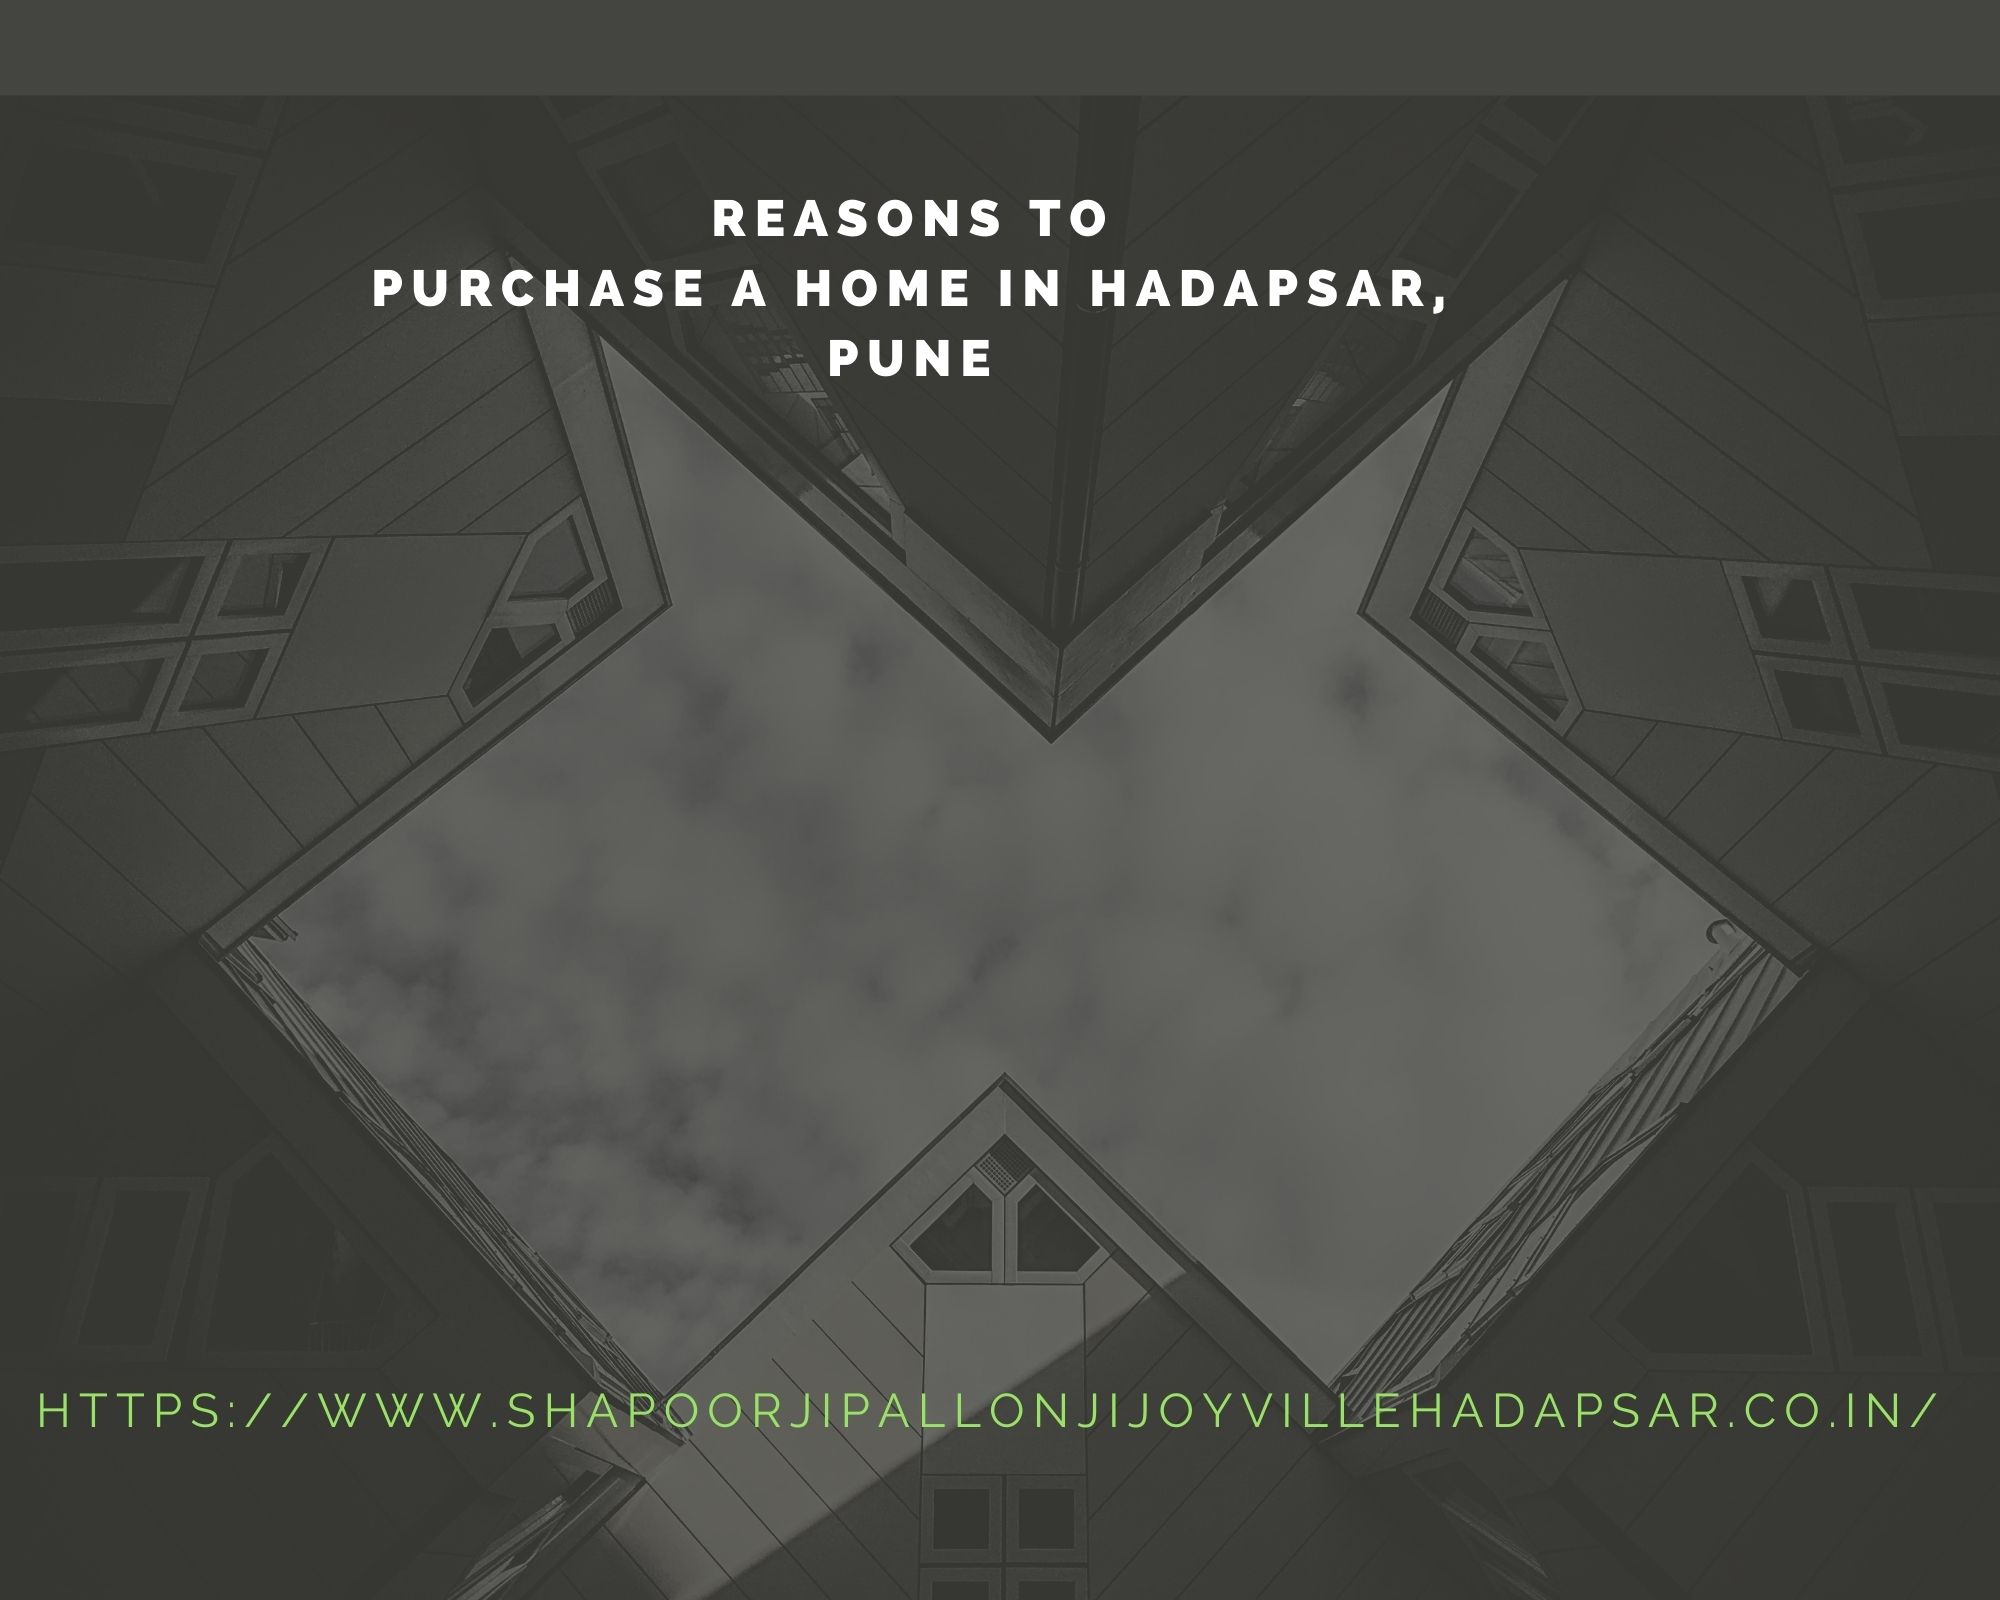 Reasons to purchase a home in Hadapsar, Pune